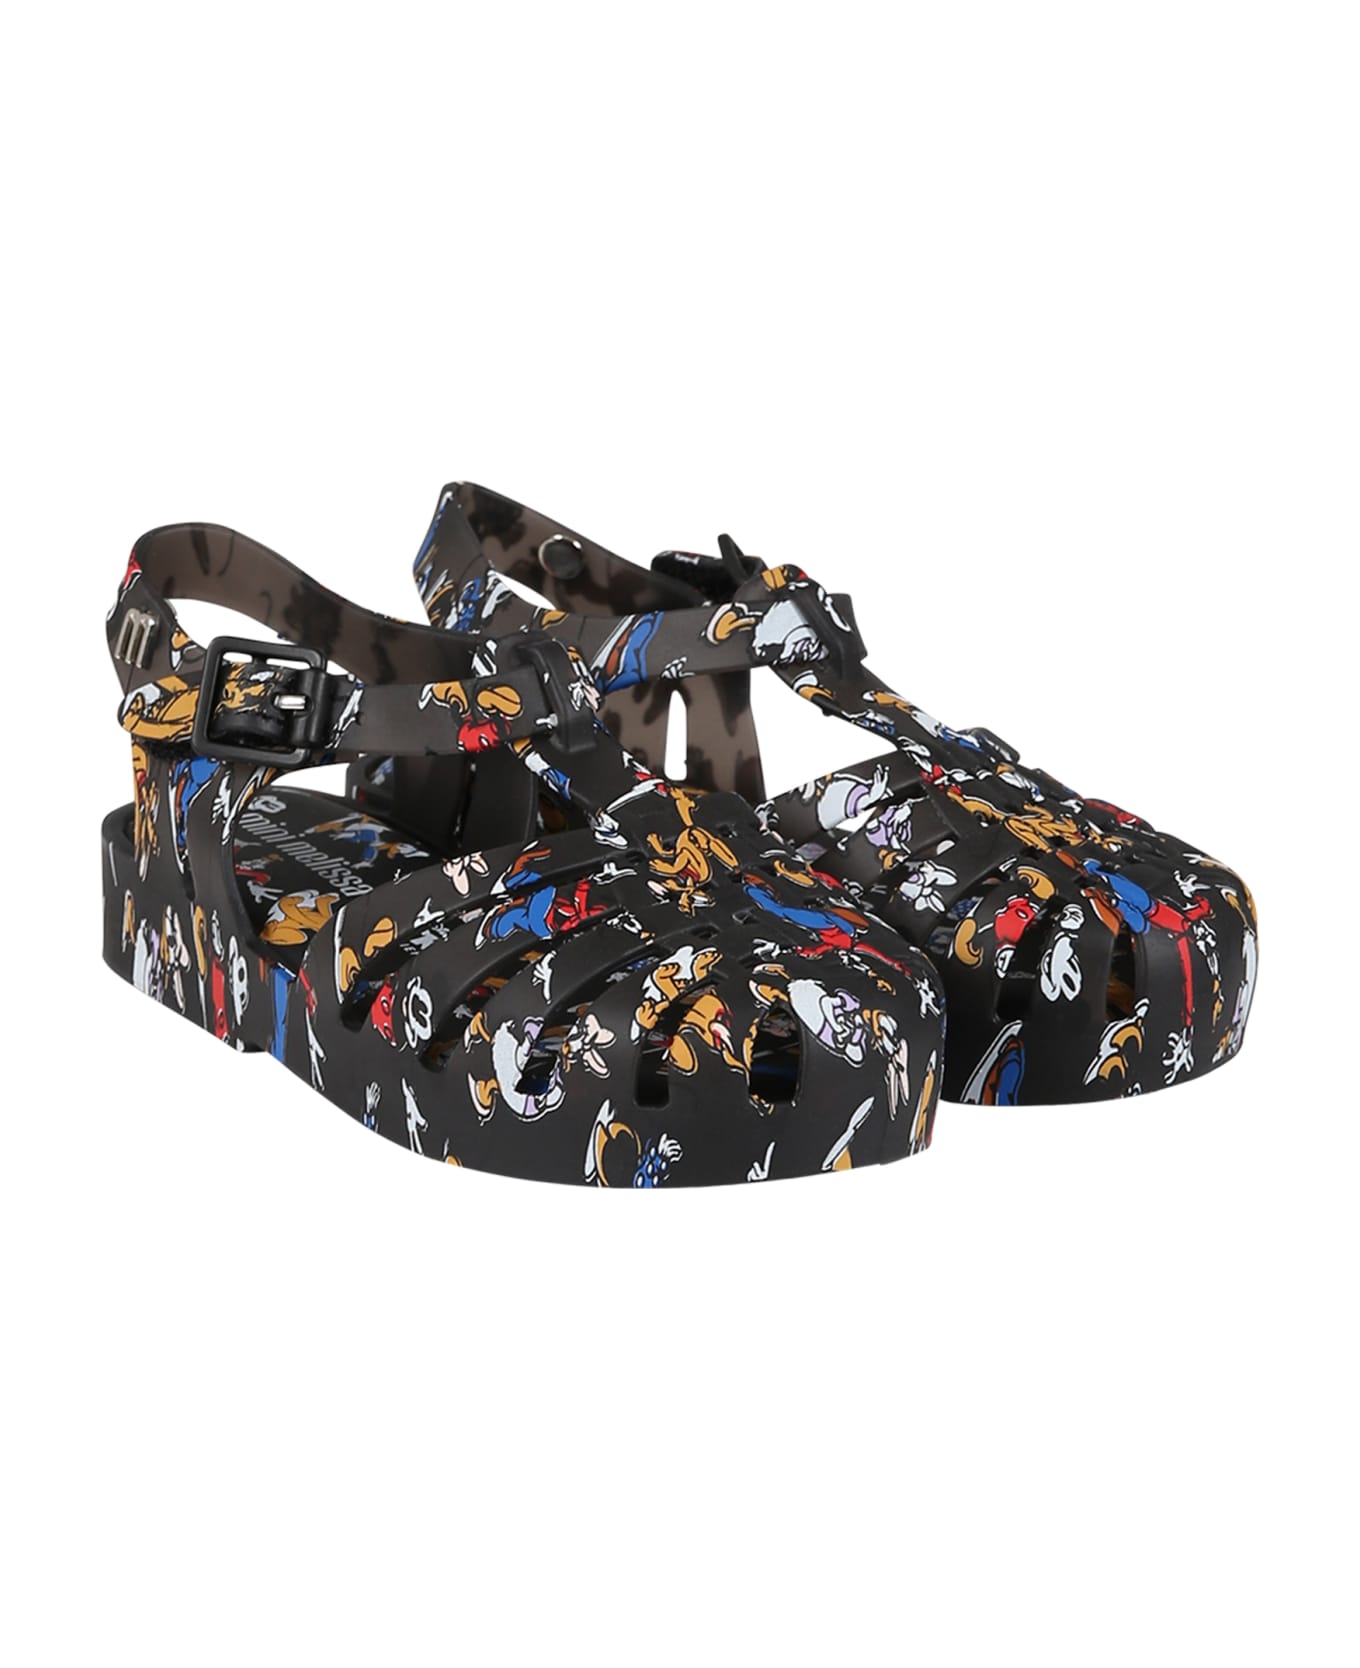 Melissa Black Sandals For Boy With Disney Characters - Black